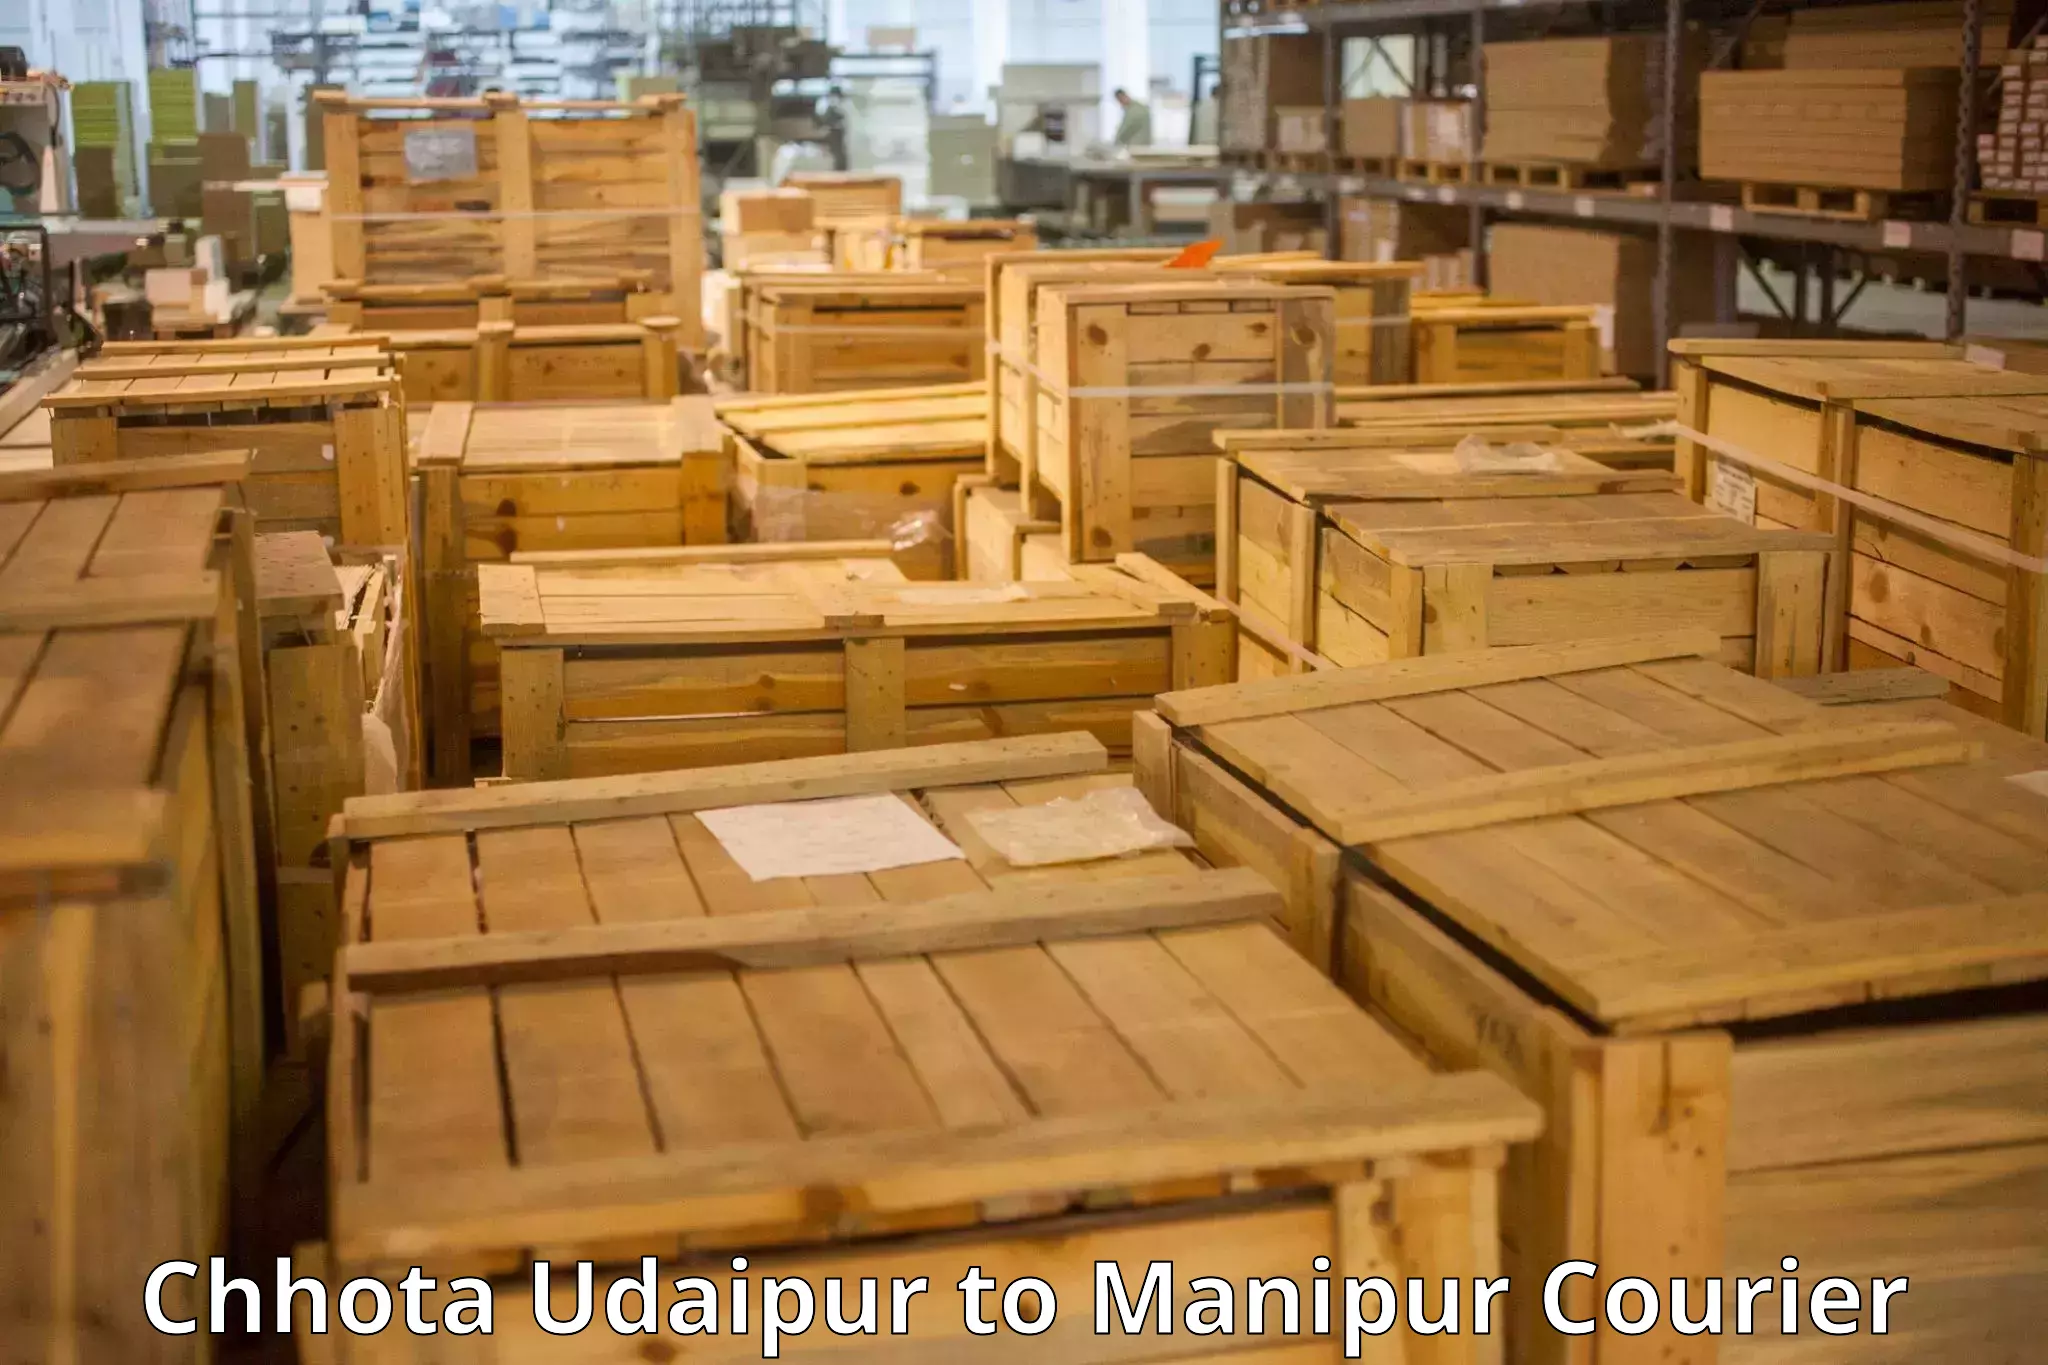 Baggage shipping experience Chhota Udaipur to Manipur